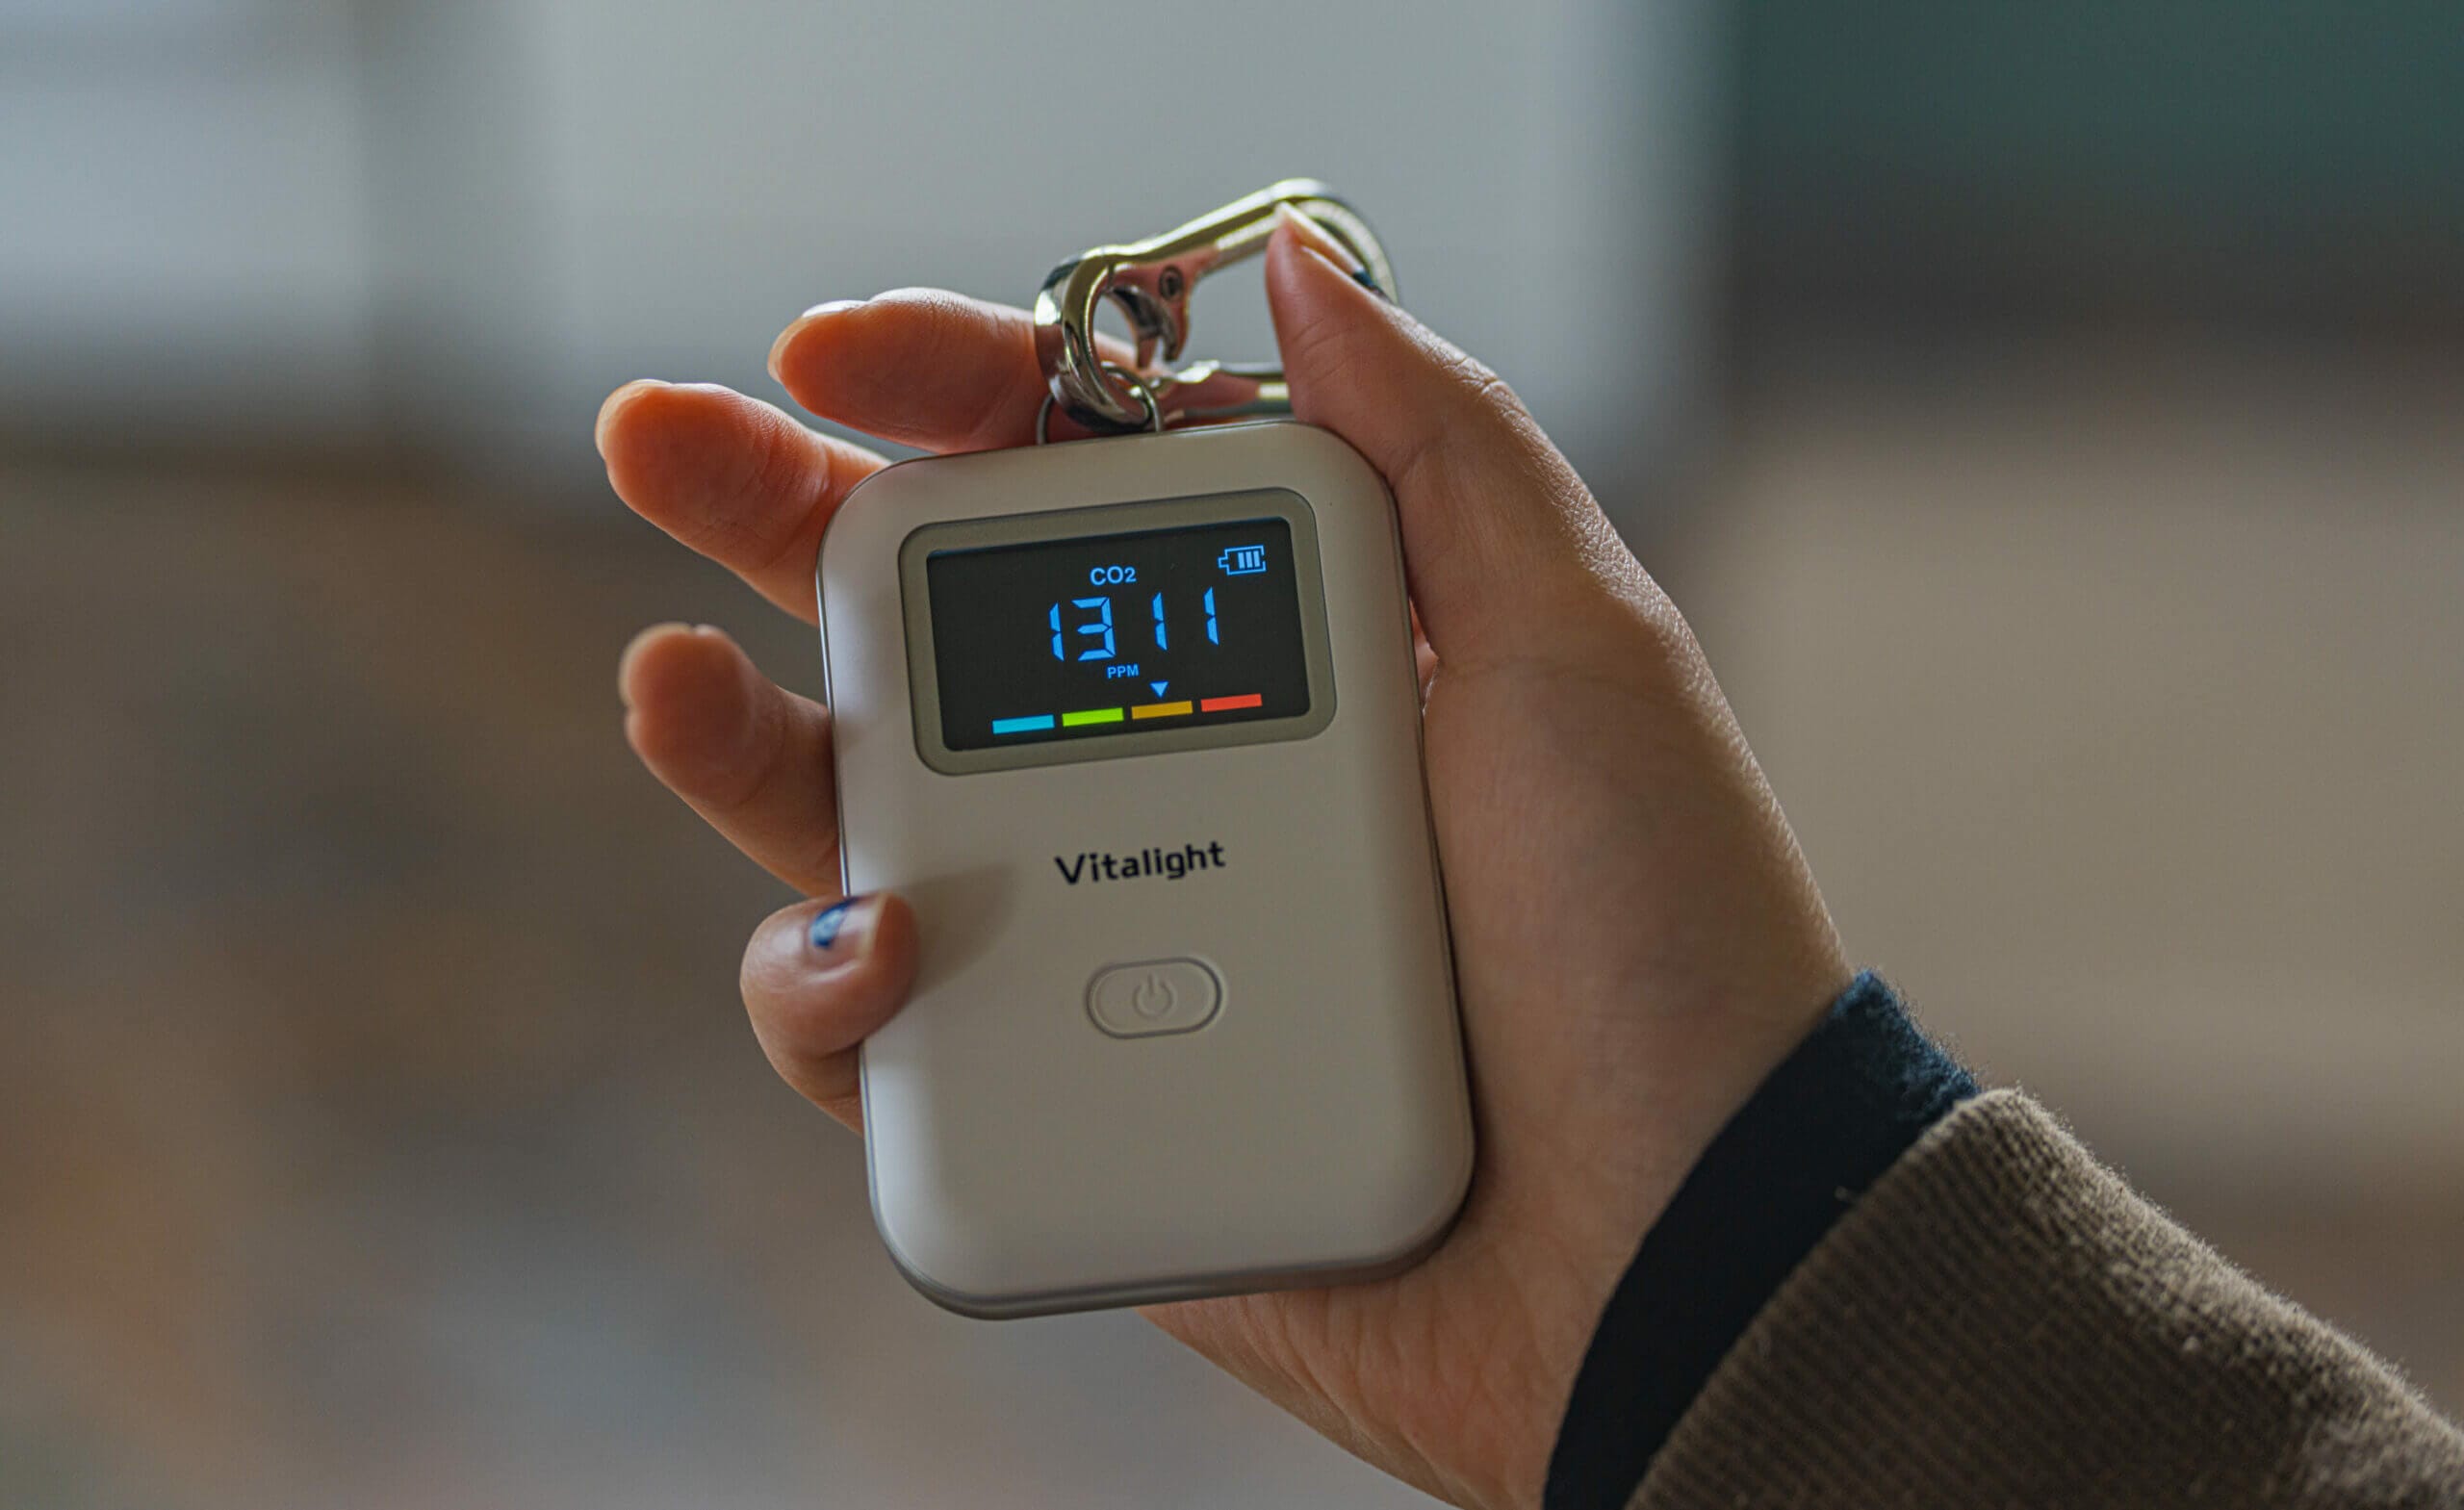 Vitalight Mini CO2 Detector Review An Affordable Alternative?